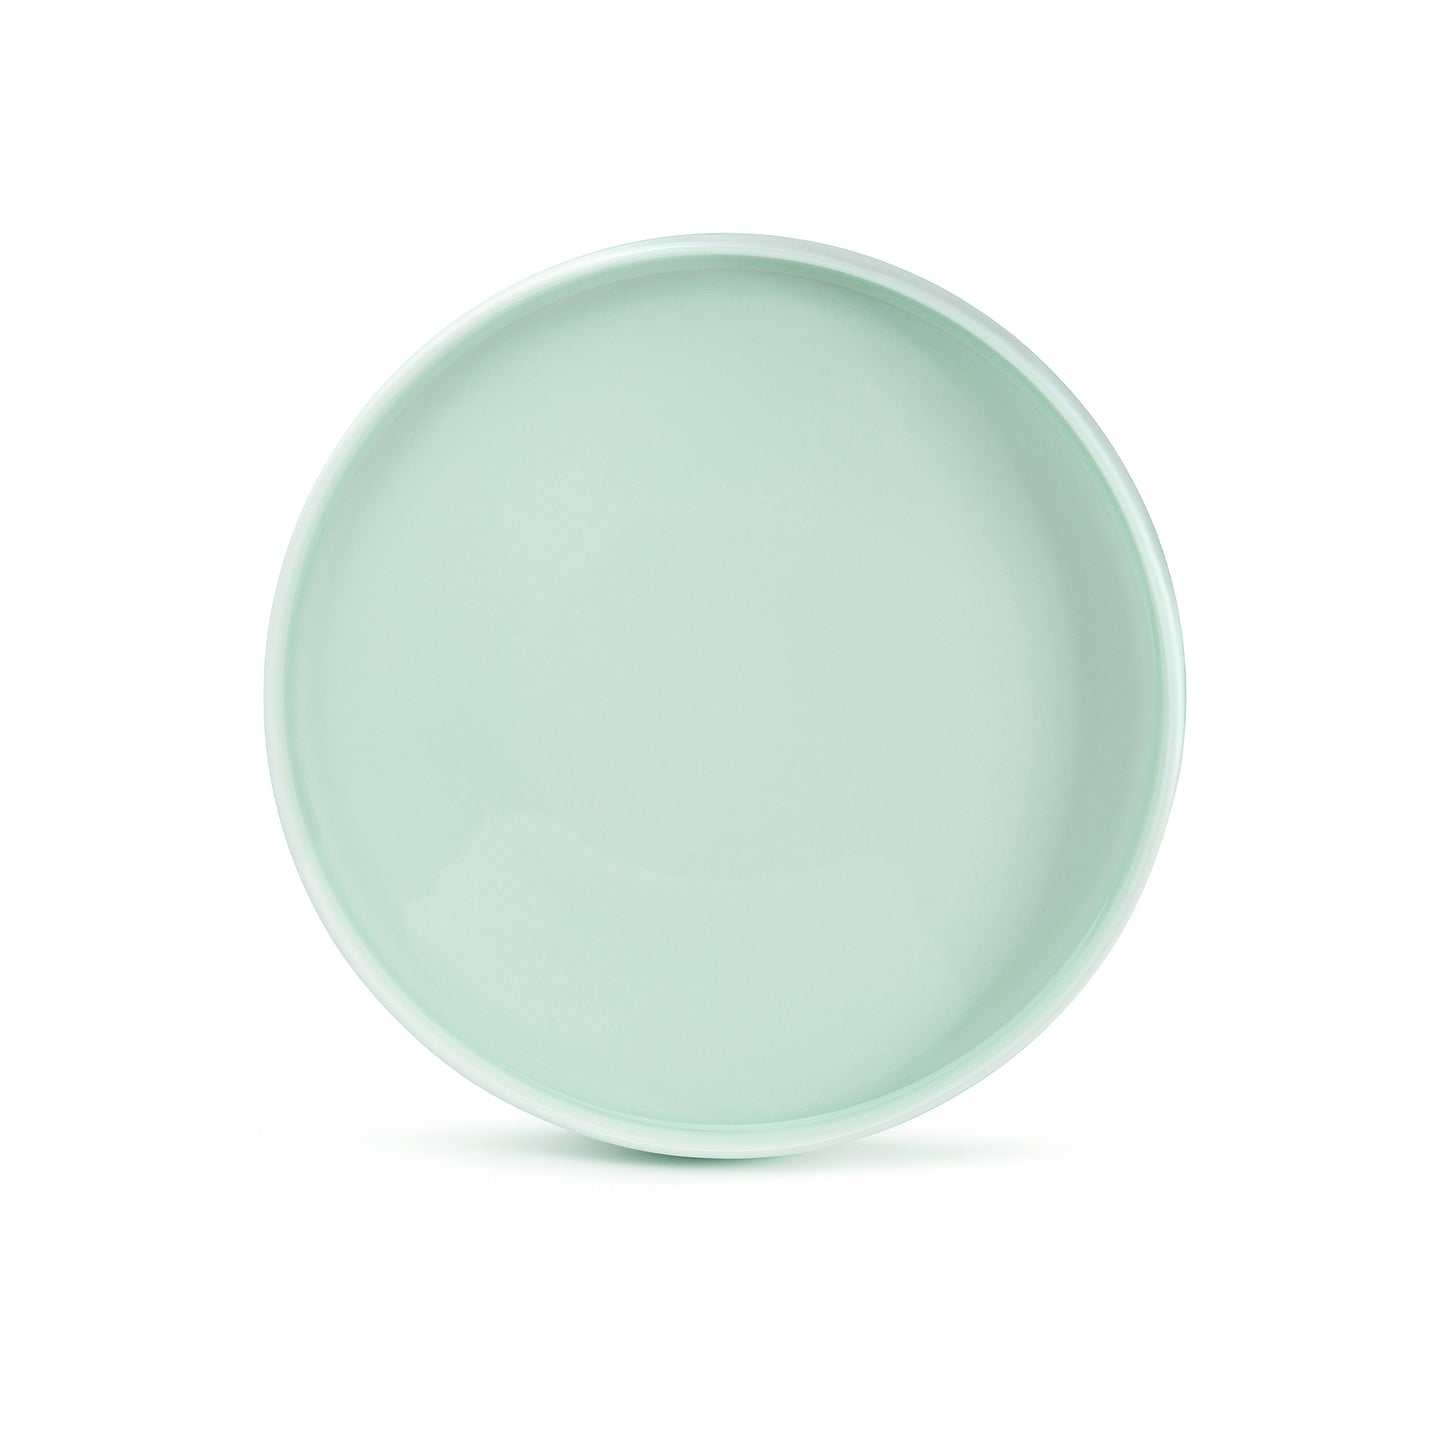 10" green celadon porcelain straight-sided dinner plate, top view, , media 2 of 4